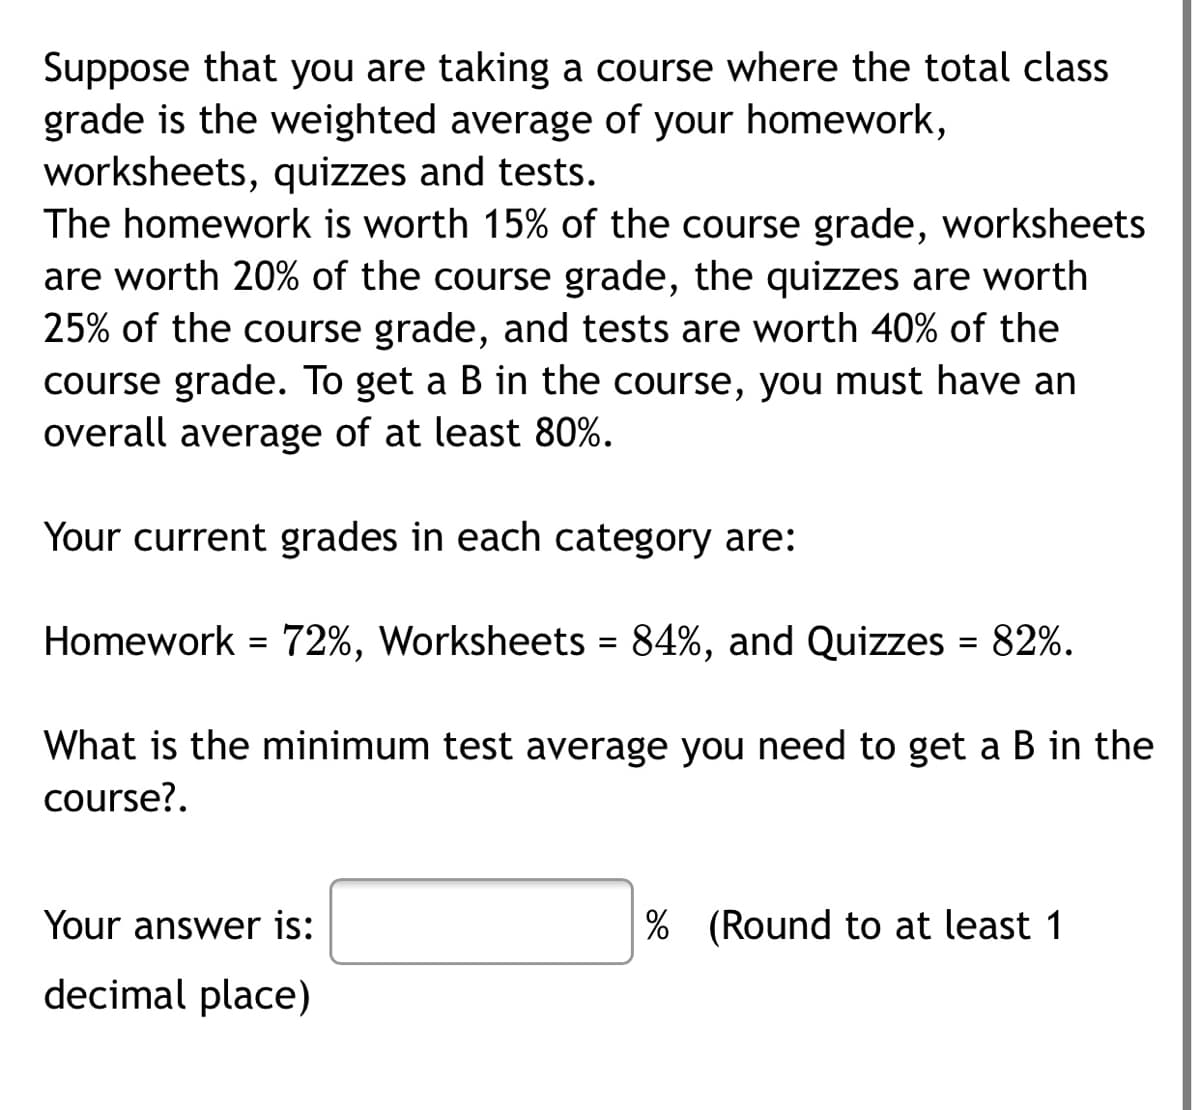 Suppose that you are taking a course where the total class
grade is the weighted average of your homework,
worksheets, quizzes and tests.
The homework is worth 15% of the course grade, worksheets
are worth 20% of the course grade, the quizzes are worth
25% of the course grade, and tests are worth 40% of the
course grade. To get a B in the course, you must have an
overall average of at least 80%.
Your current grades in each category are:
Homework = 72%, Worksheets = 84%, and Quizzes = 82%.
What is the minimum test average you need to get a B in the
course?.
Your answer is:
% (Round to at least 1
decimal place)